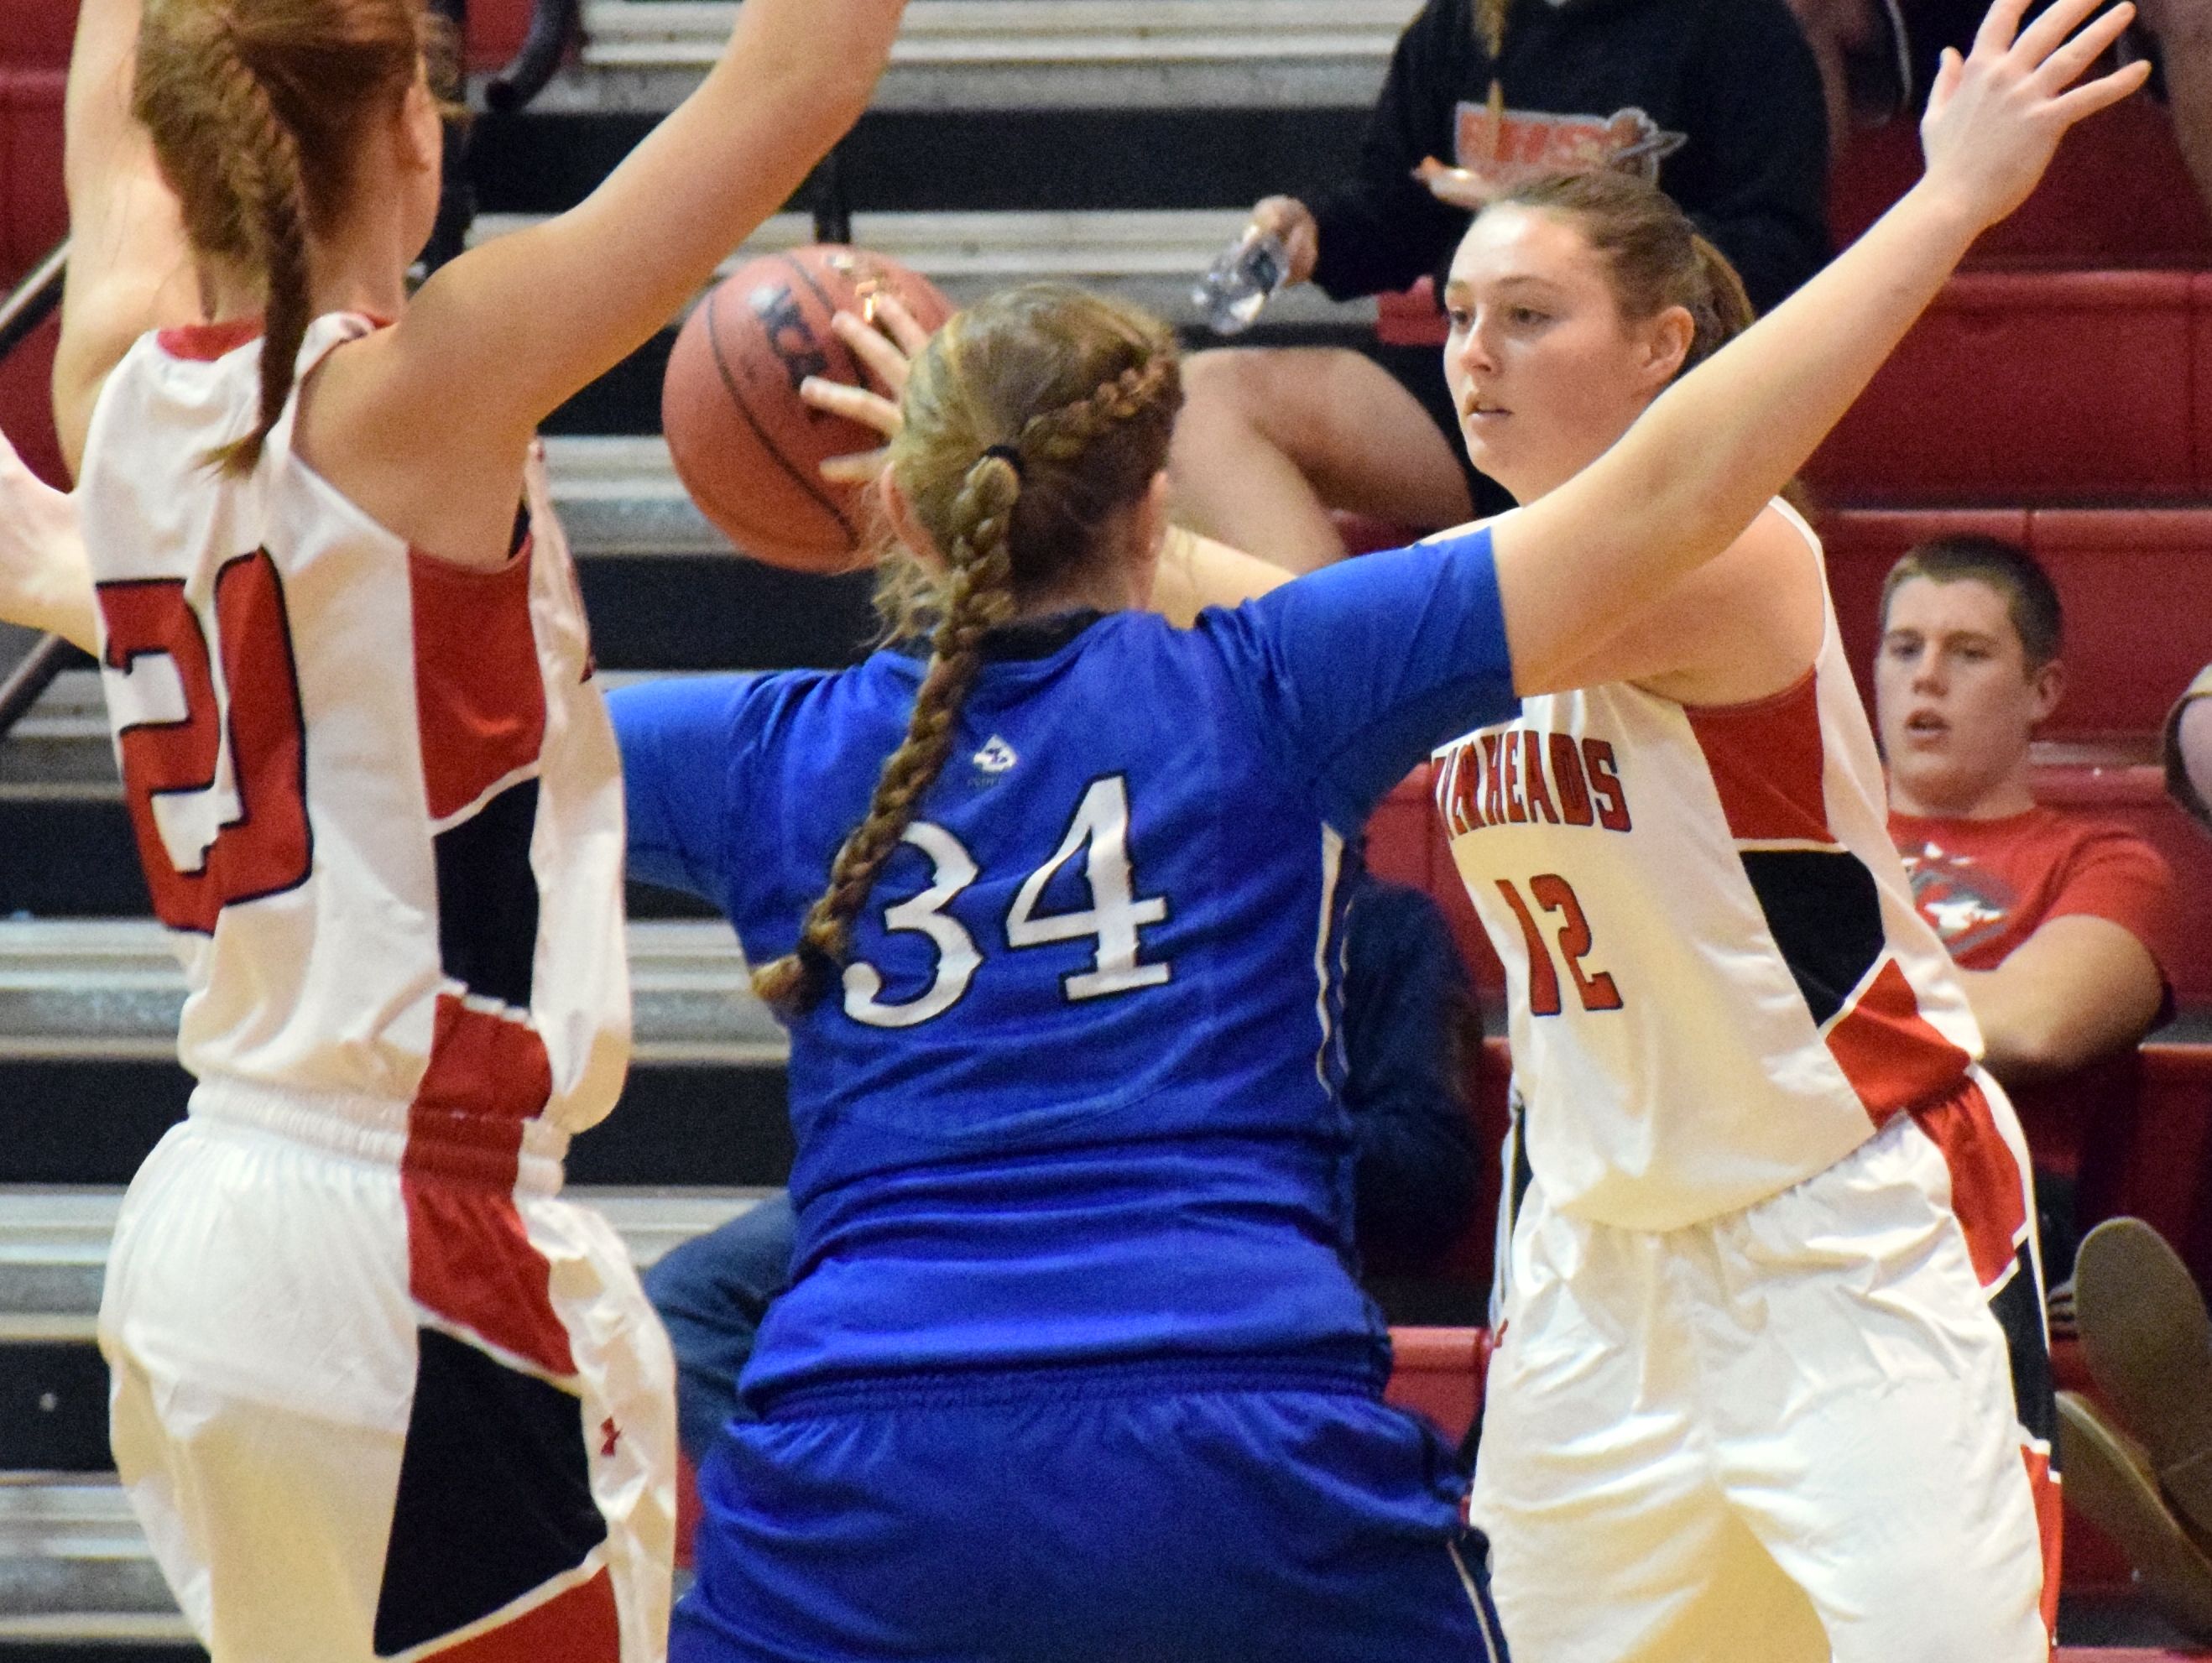 Riverheads' Emma Casto, right, looks for a teammate to pass to as Fort Defiance's Julia Frazier gets between Casto and the Gladiators' Blake Bartley during their girls basketball game Wednesday, Dec. 14, 2016, at Riverheads High School in Greenville, Va.